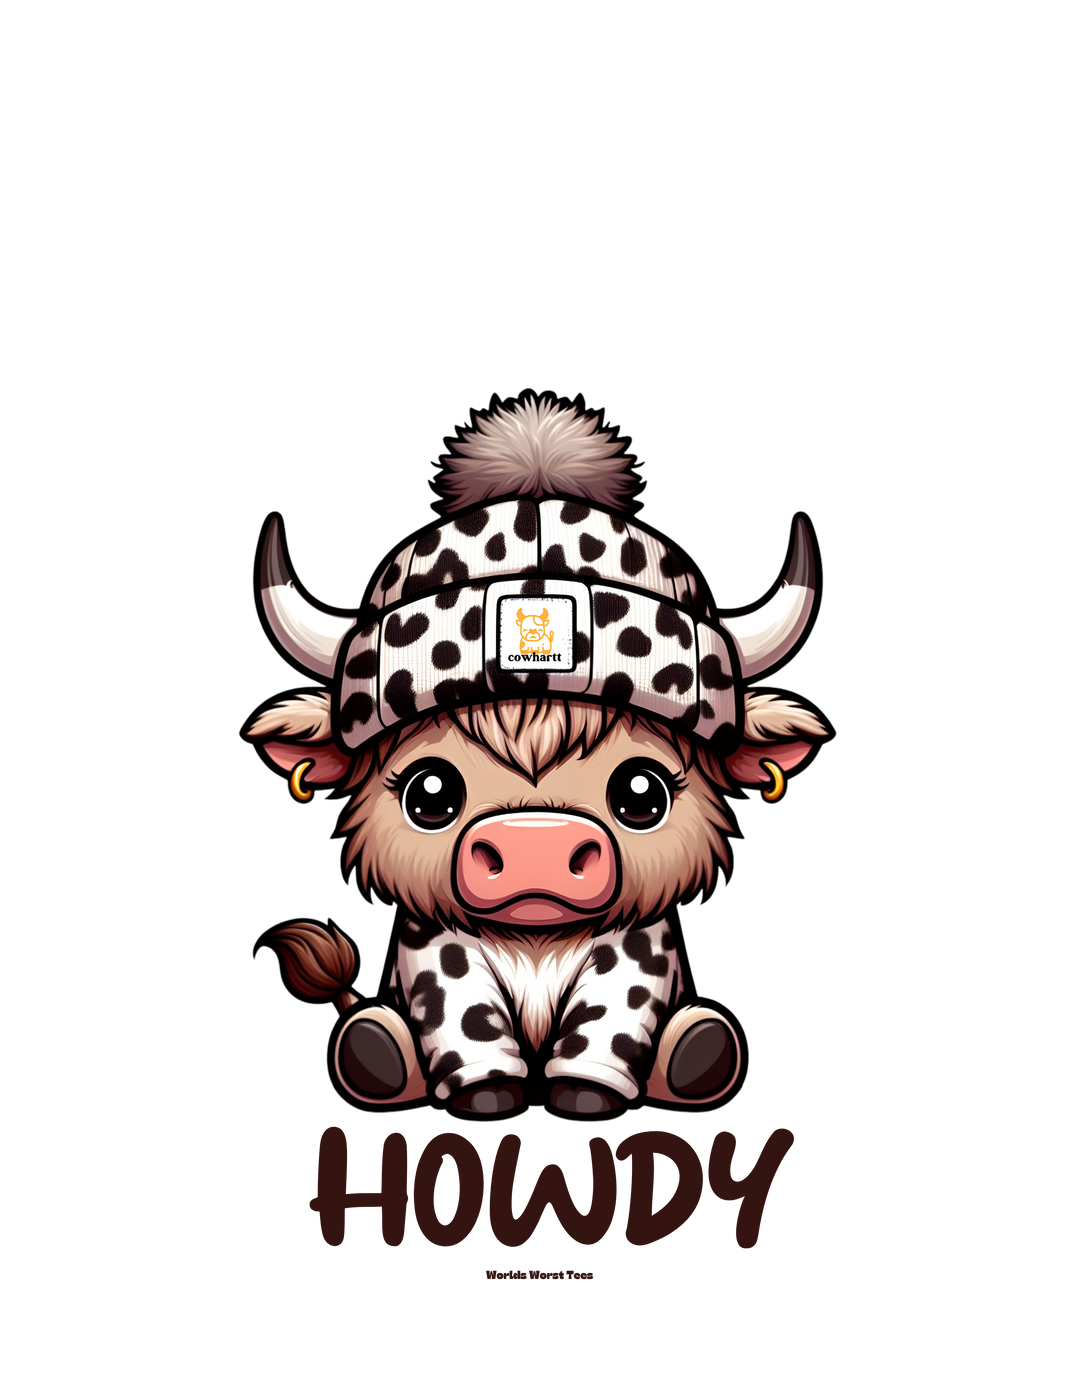 A Howdy Toddler Tee featuring a cartoon cow wearing a hat, perfect for sensitive skin. 100% combed ringspun cotton, light fabric, tear-away label, classic fit. Sizes: 2T, 3T, 4T, 5-6T.